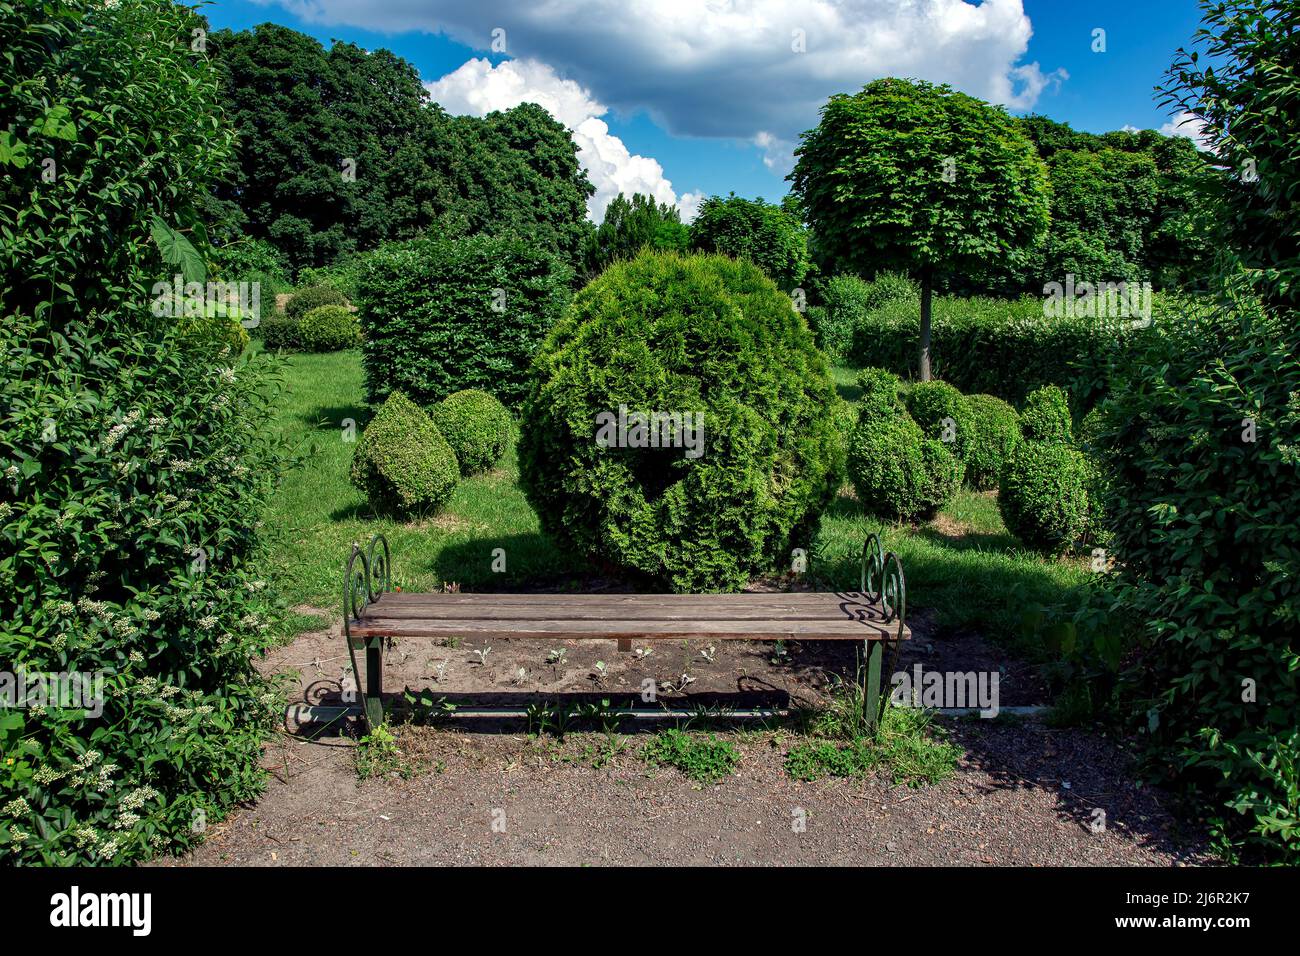 bench with wooden seat near clipped evergreen thuja bushes in topiary different shape in the background deciduous trees illuminated by sunlight summer Stock Photo